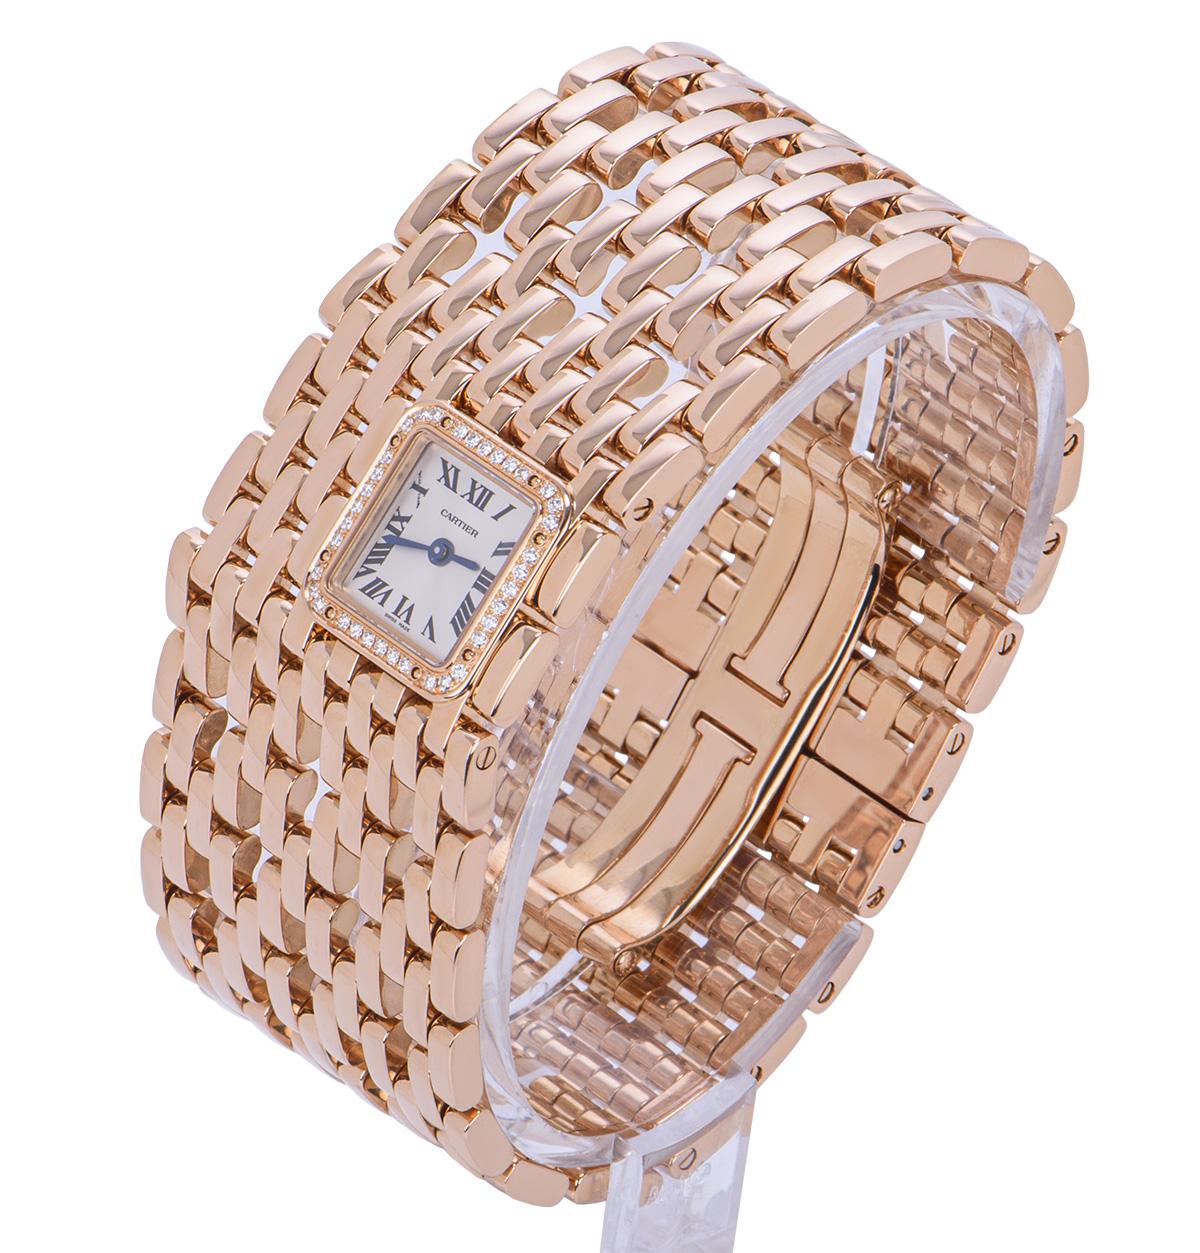 From Cartier's Panthere de Cartier collection, this 31 mm rose gold cuff watch is in unworn condition. Features a silvered dial concealed with sapphire crystal featuring Roman numerals, sword-shaped hands in blued steel and a secret Cartier